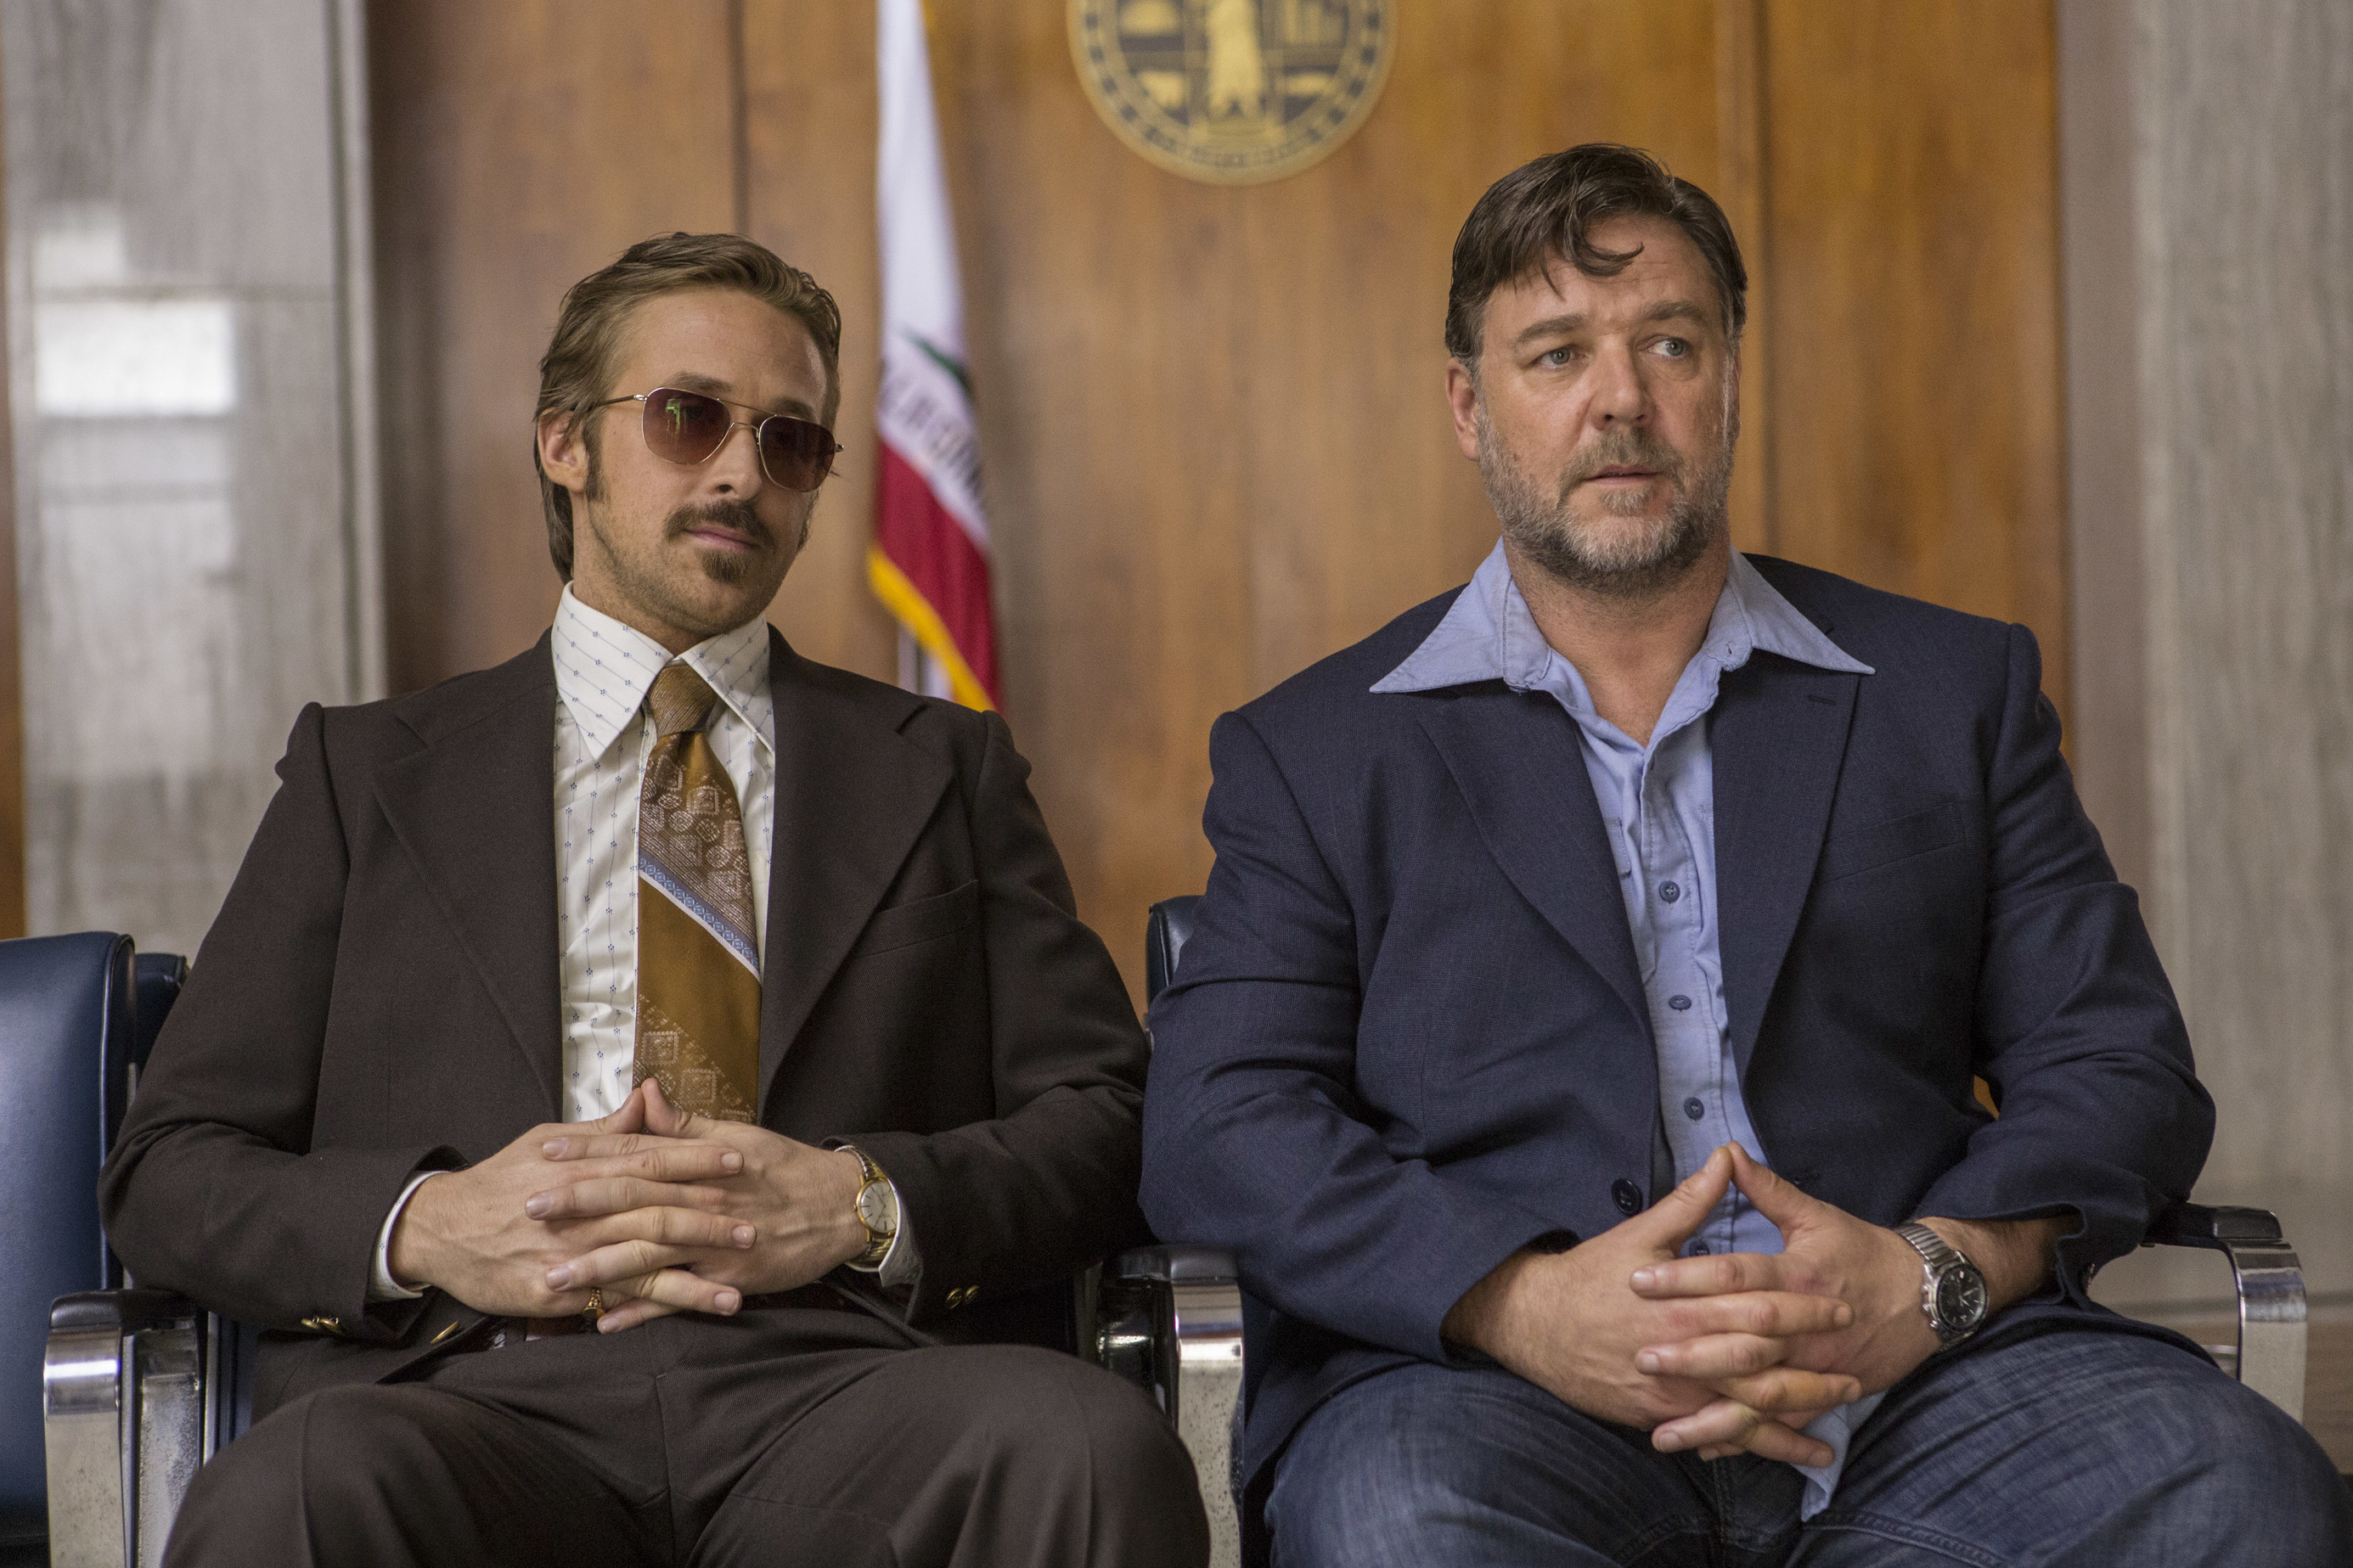 Ryan Gosling and Russell Crowe sit together in The Nice Guys.